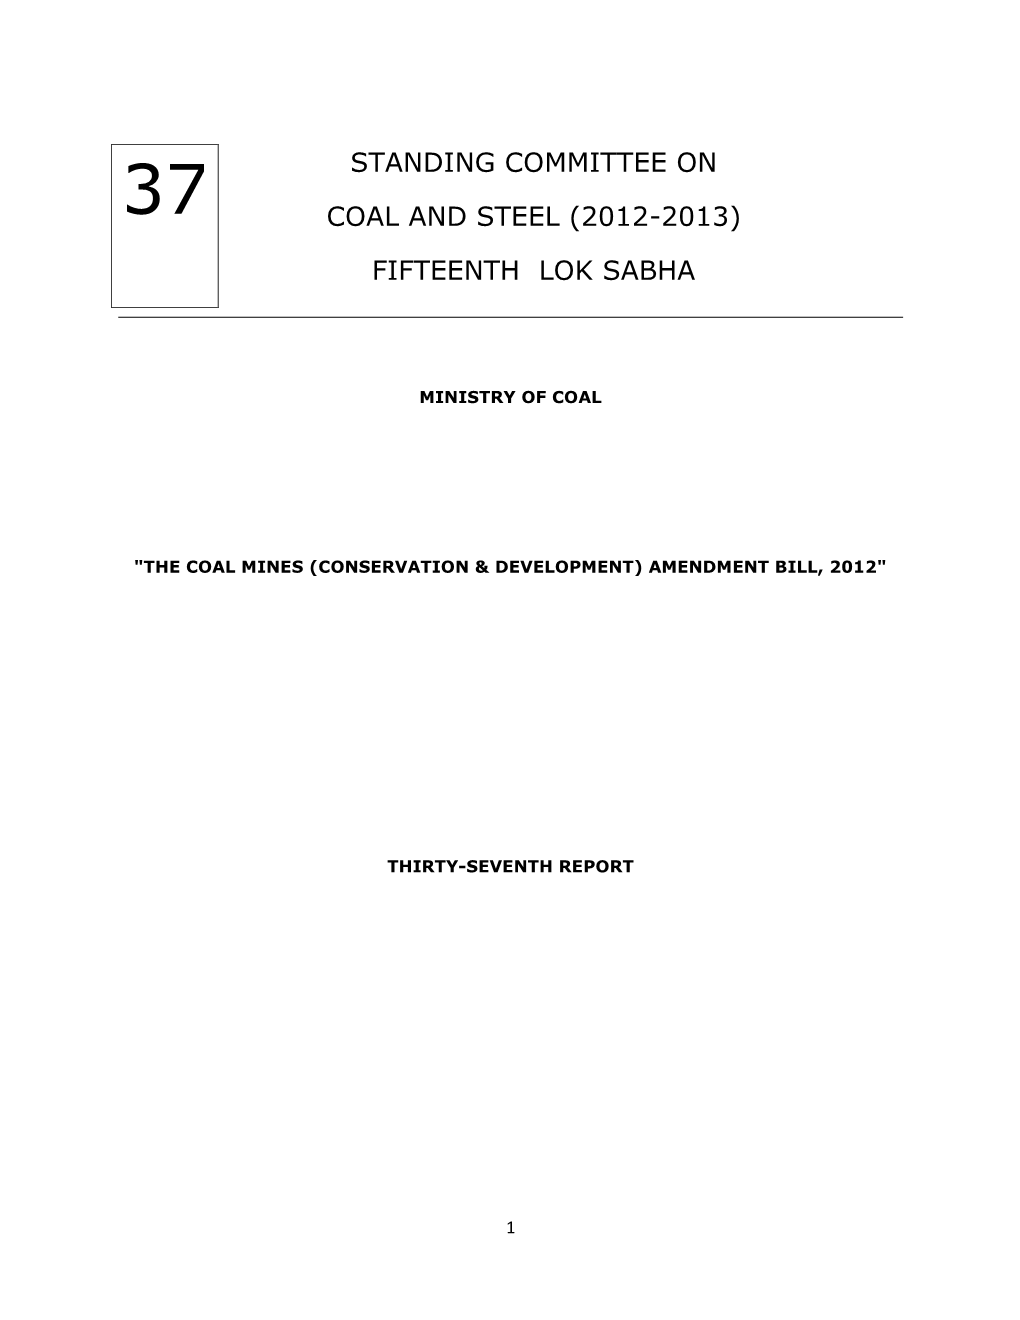 Standing Committee on Coal and Steel (2012-2013)